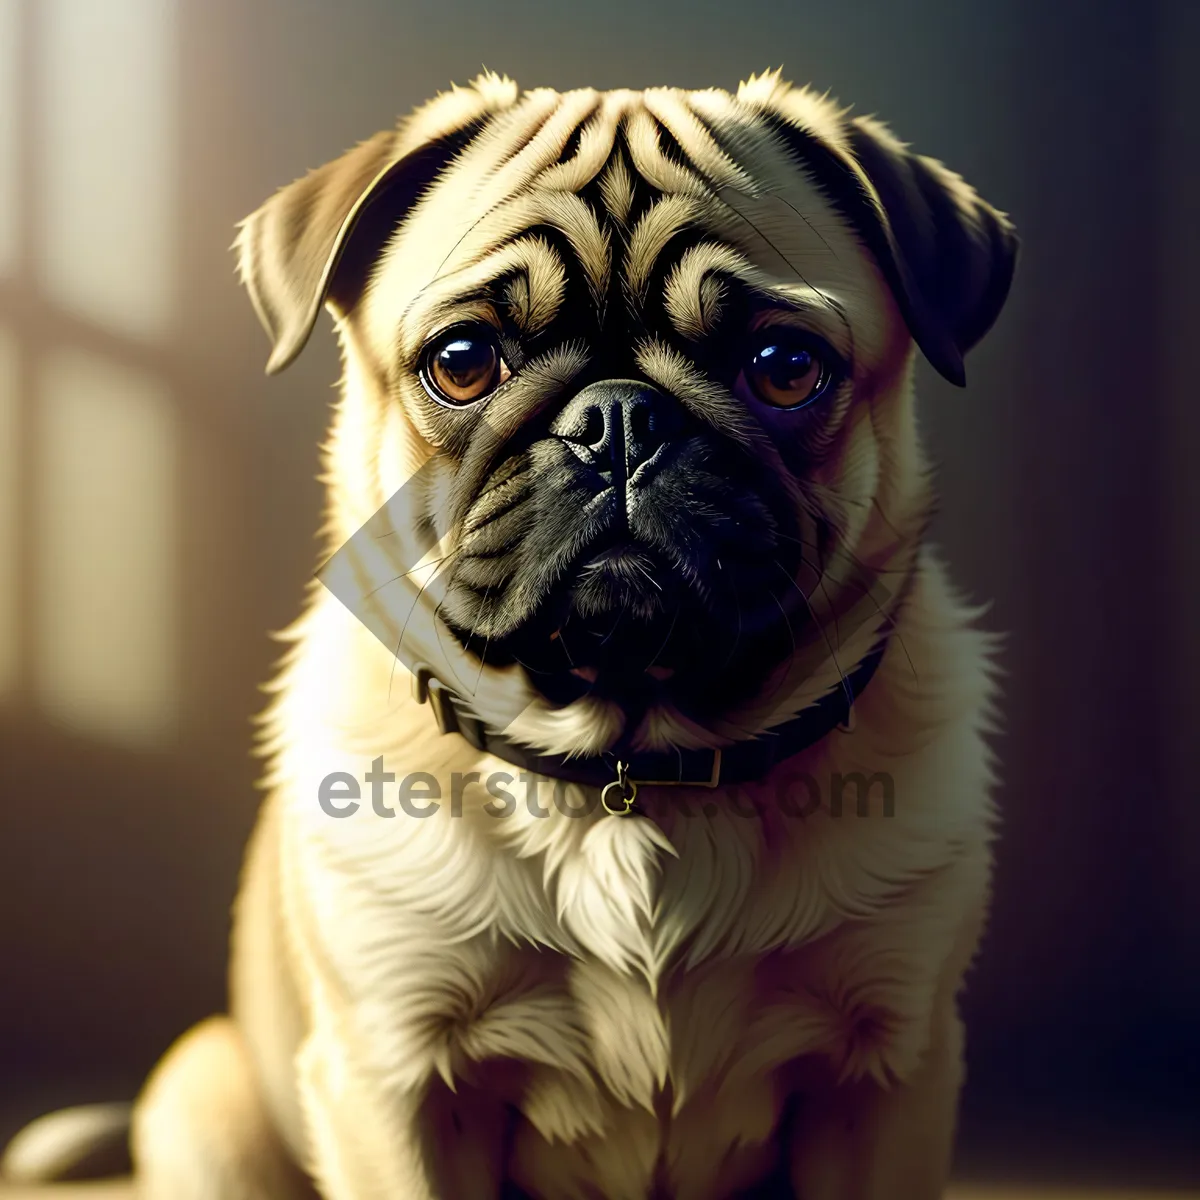 Picture of Cute Wrinkled Pug Puppy Sitting and Looking Adorable